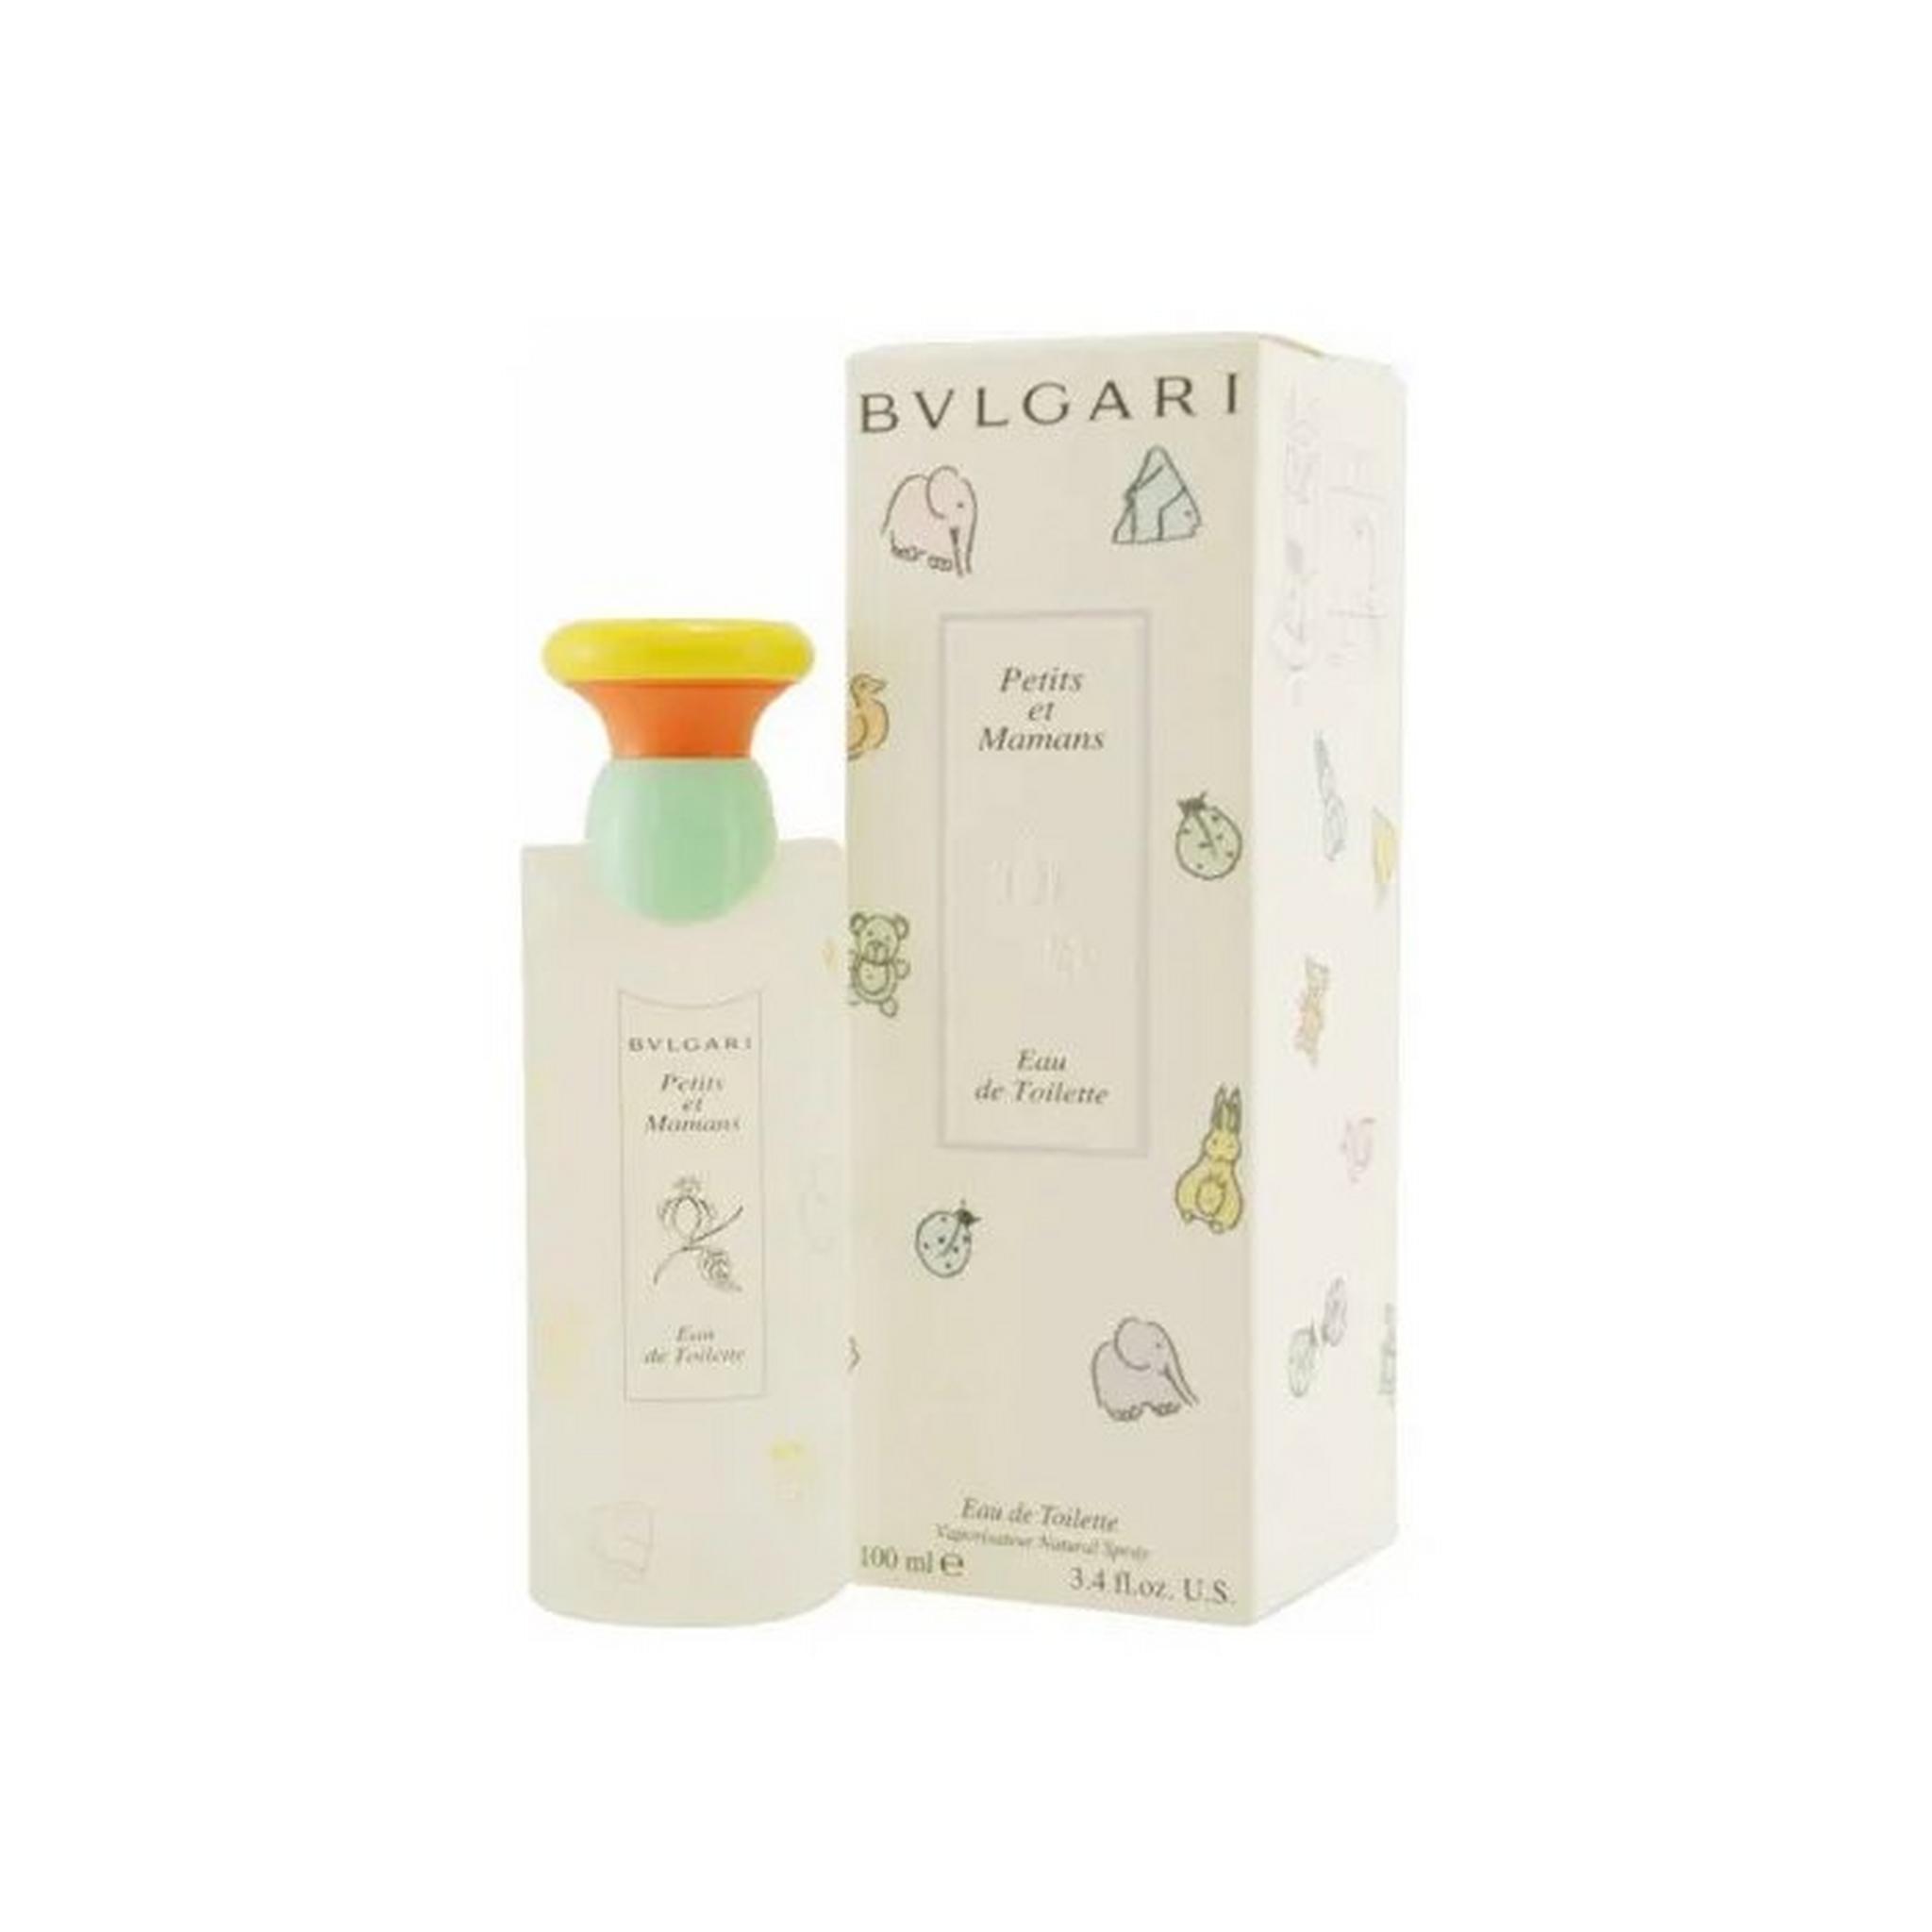 Bvlgari Petites A Mamans 3 Pieces Gift Set – EDT, Body Lotion, Toiletry Pouch